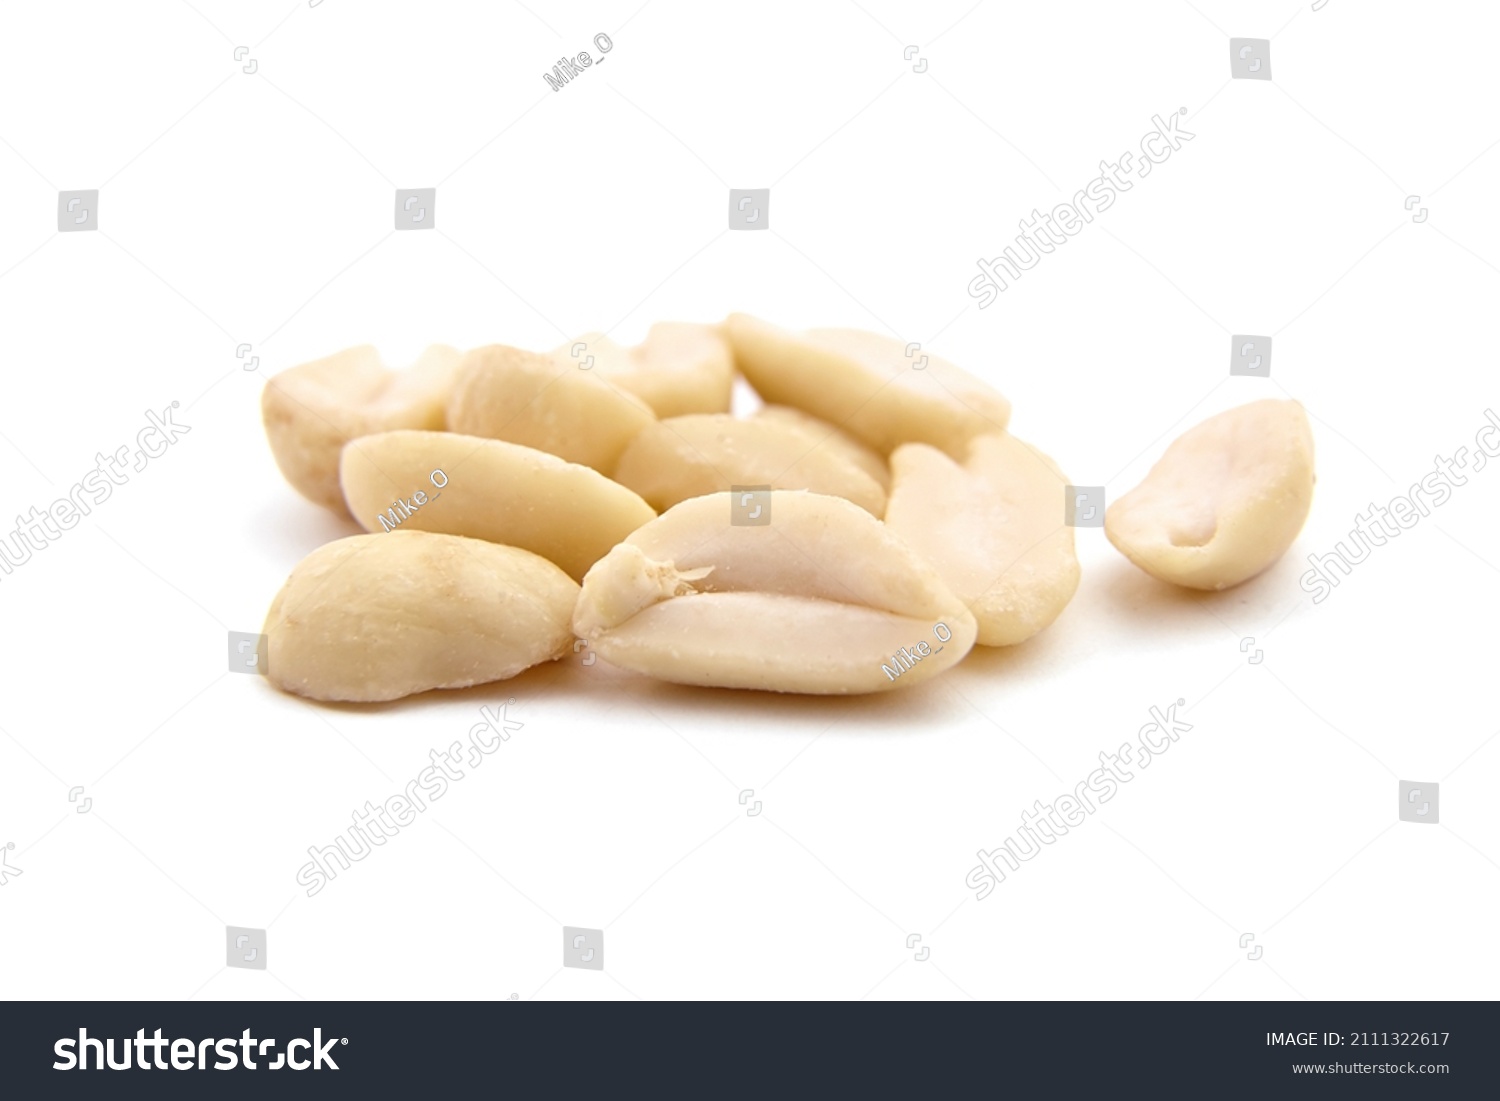 Raw blanched peanuts isolated on white background #2111322617